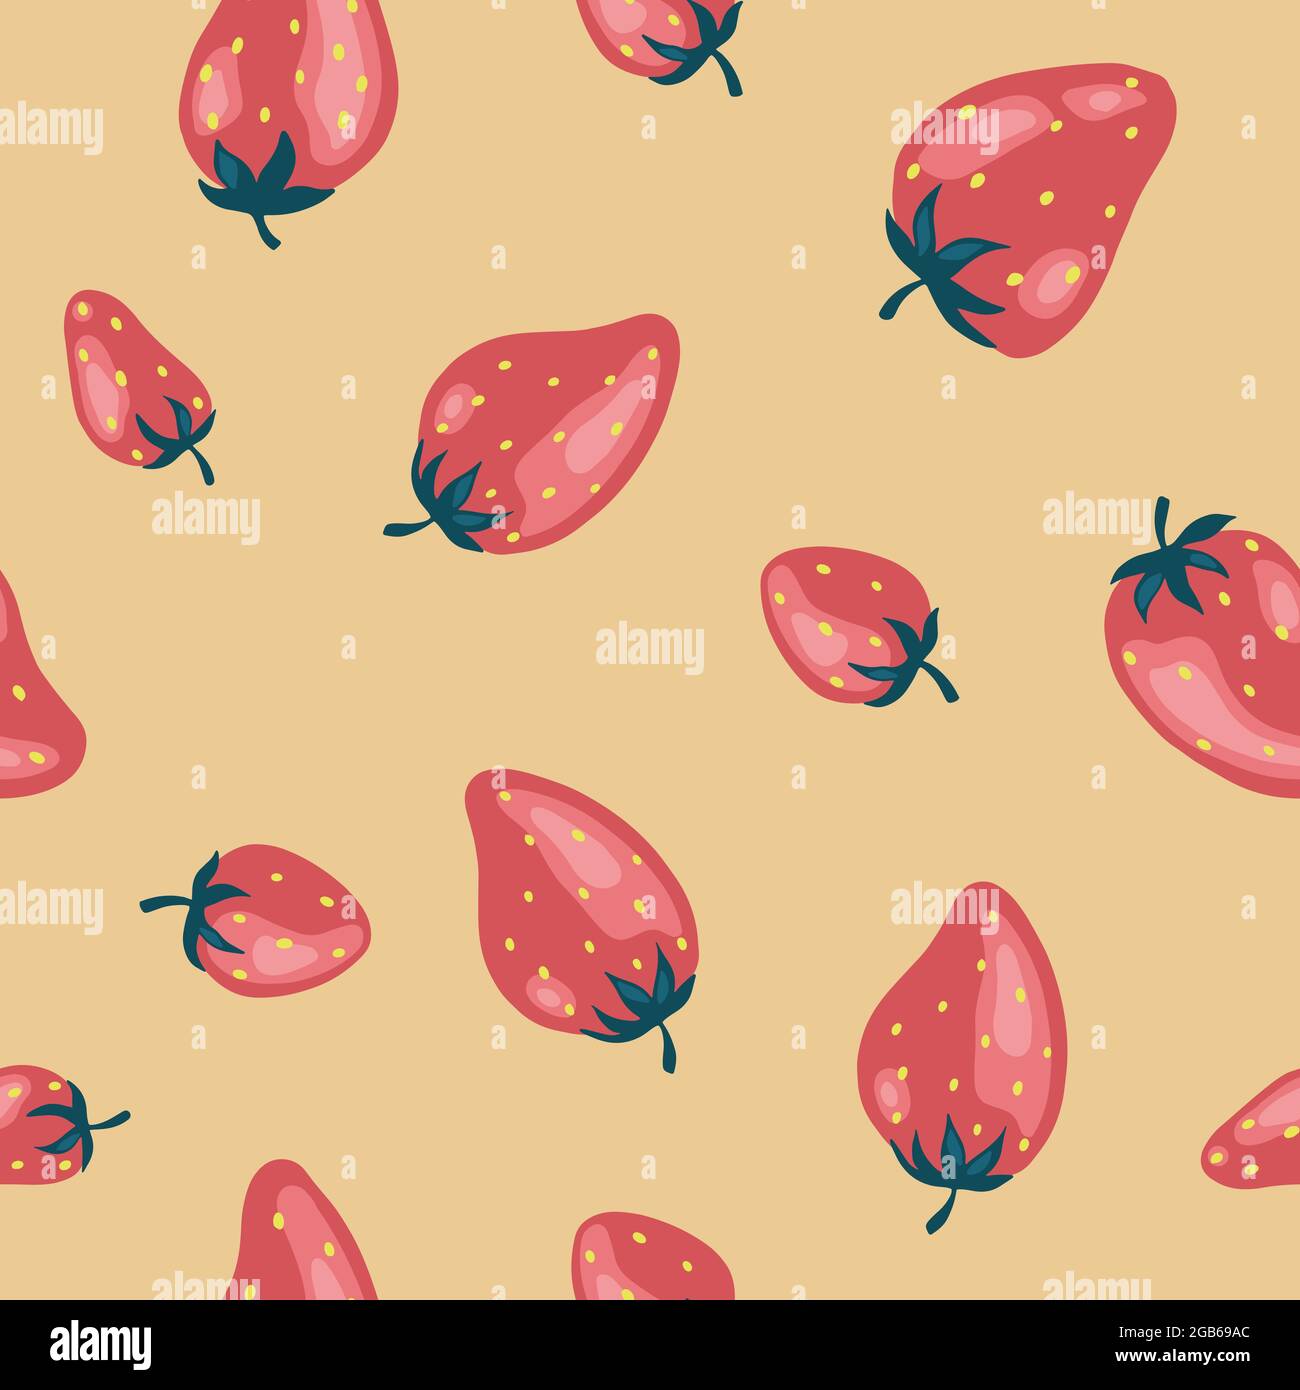 Seamless pattern of fresh strawberry background. Used for magazine, book,card, menu cover, web pages. Stock Vector